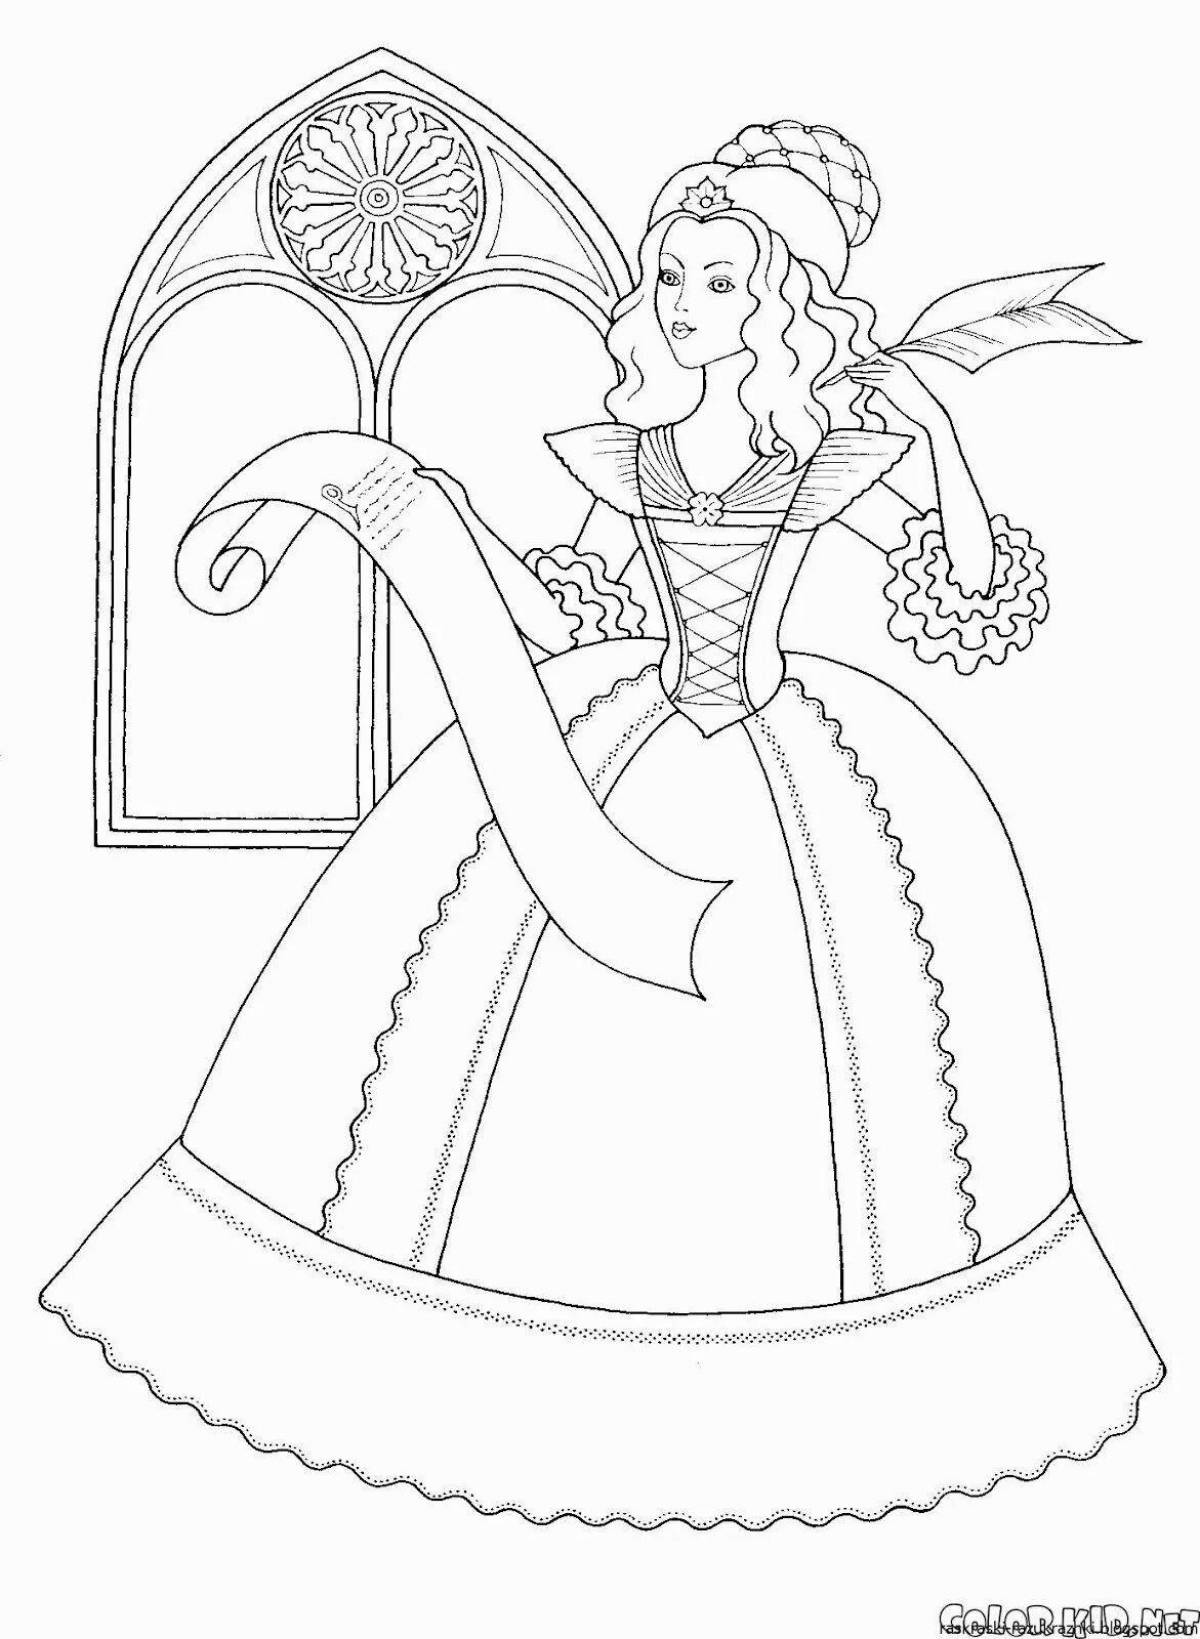 Exquisite princess coloring pages for girls 7 years old